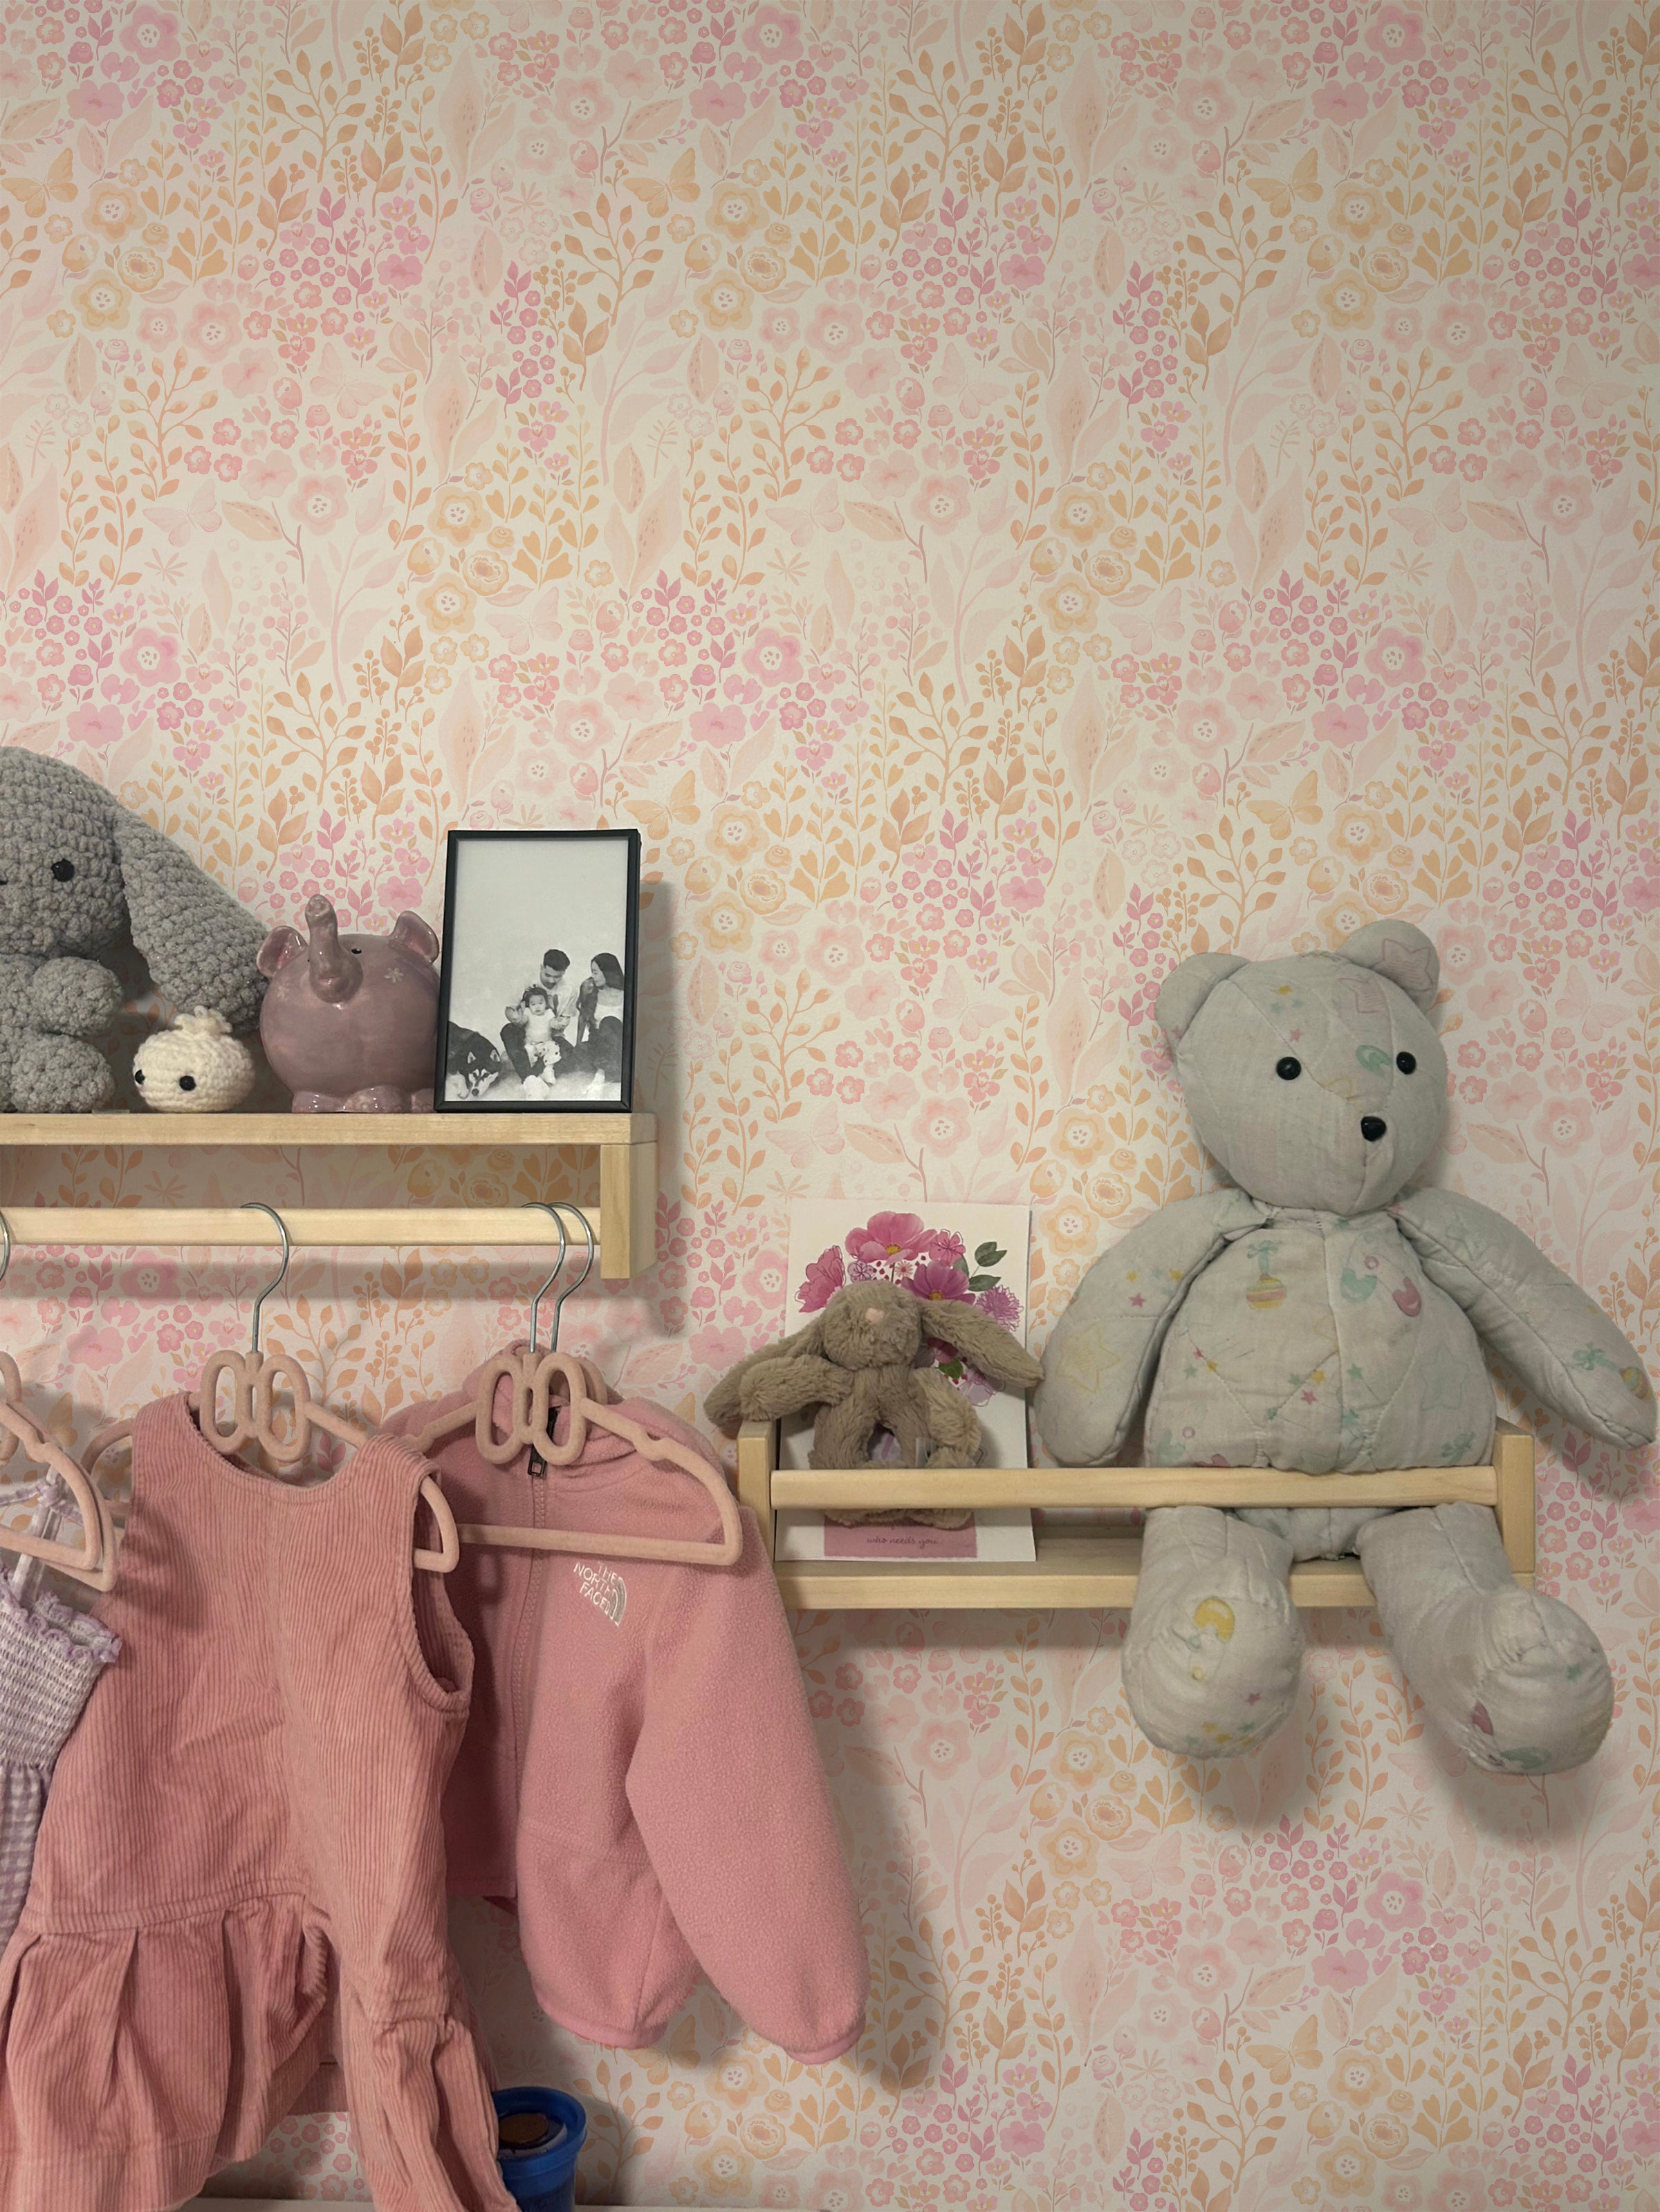 a nursery setting with "Pretty Petals Wallpaper - 12.5"," as the focal point. The wall is decorated with the pastel floral pattern, complemented by a display of children's clothing, plush toys, and a framed photograph, enhancing the room's sweet and cozy ambiance.